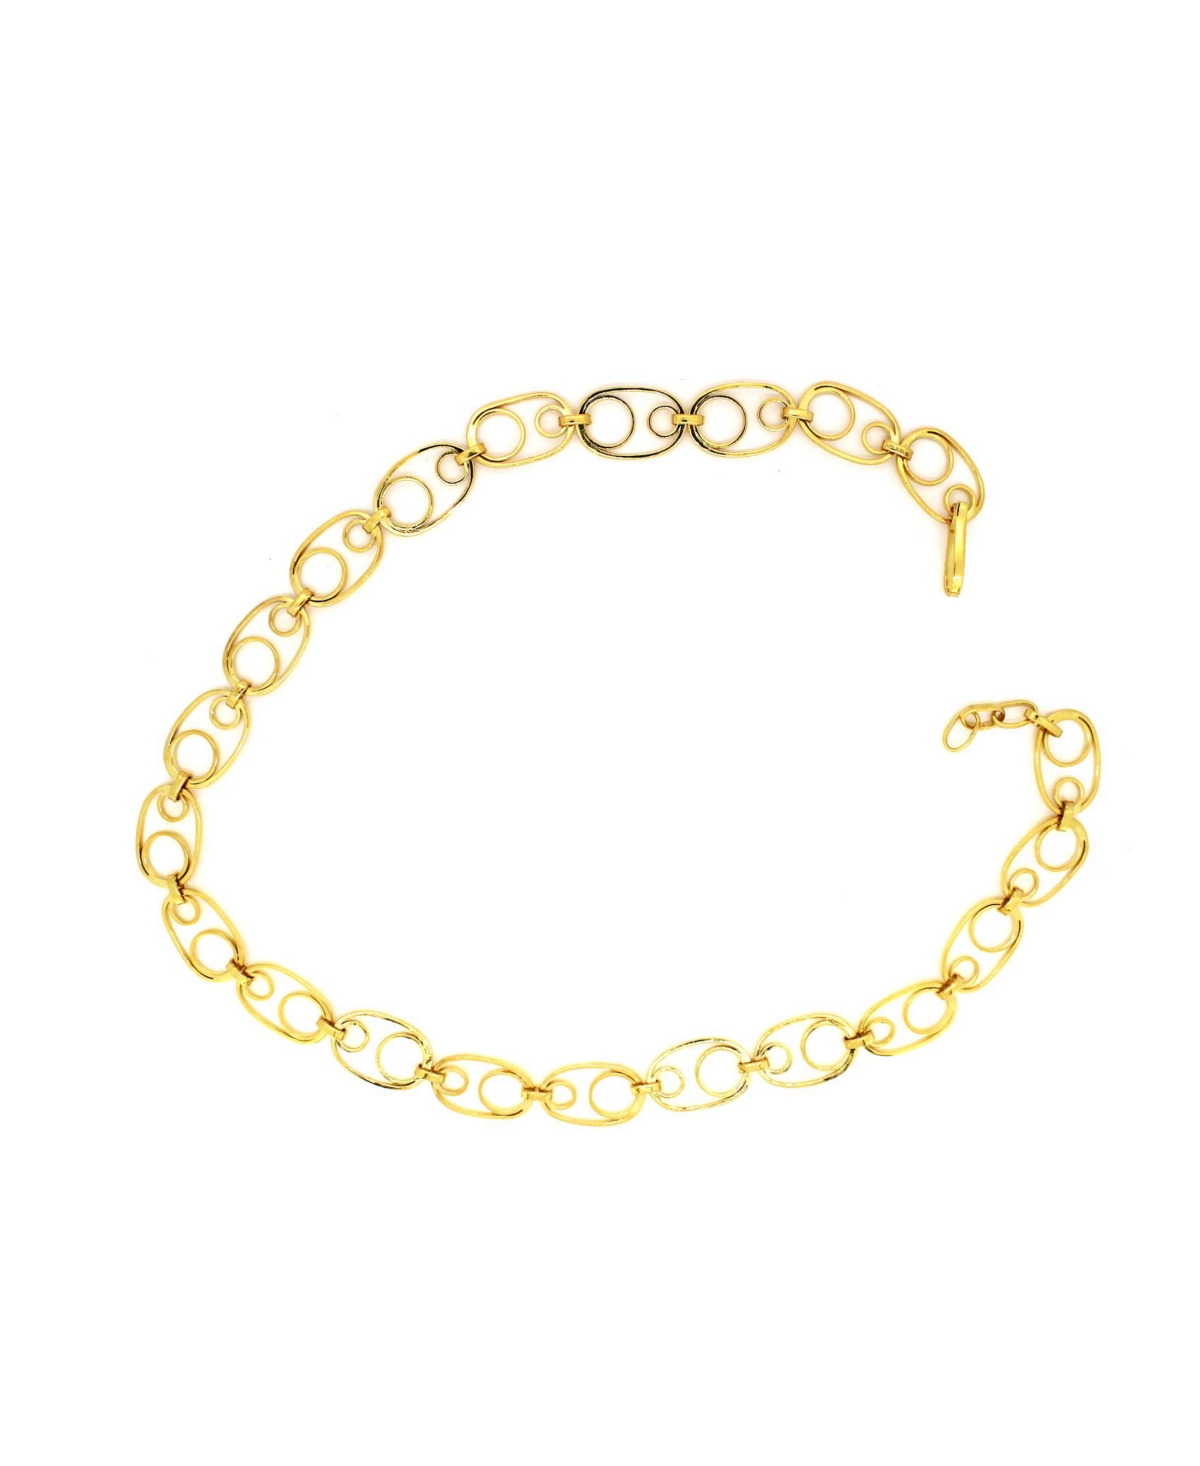 Nectar Nectar New York Hoop Serenity Necklace In Gold Plated